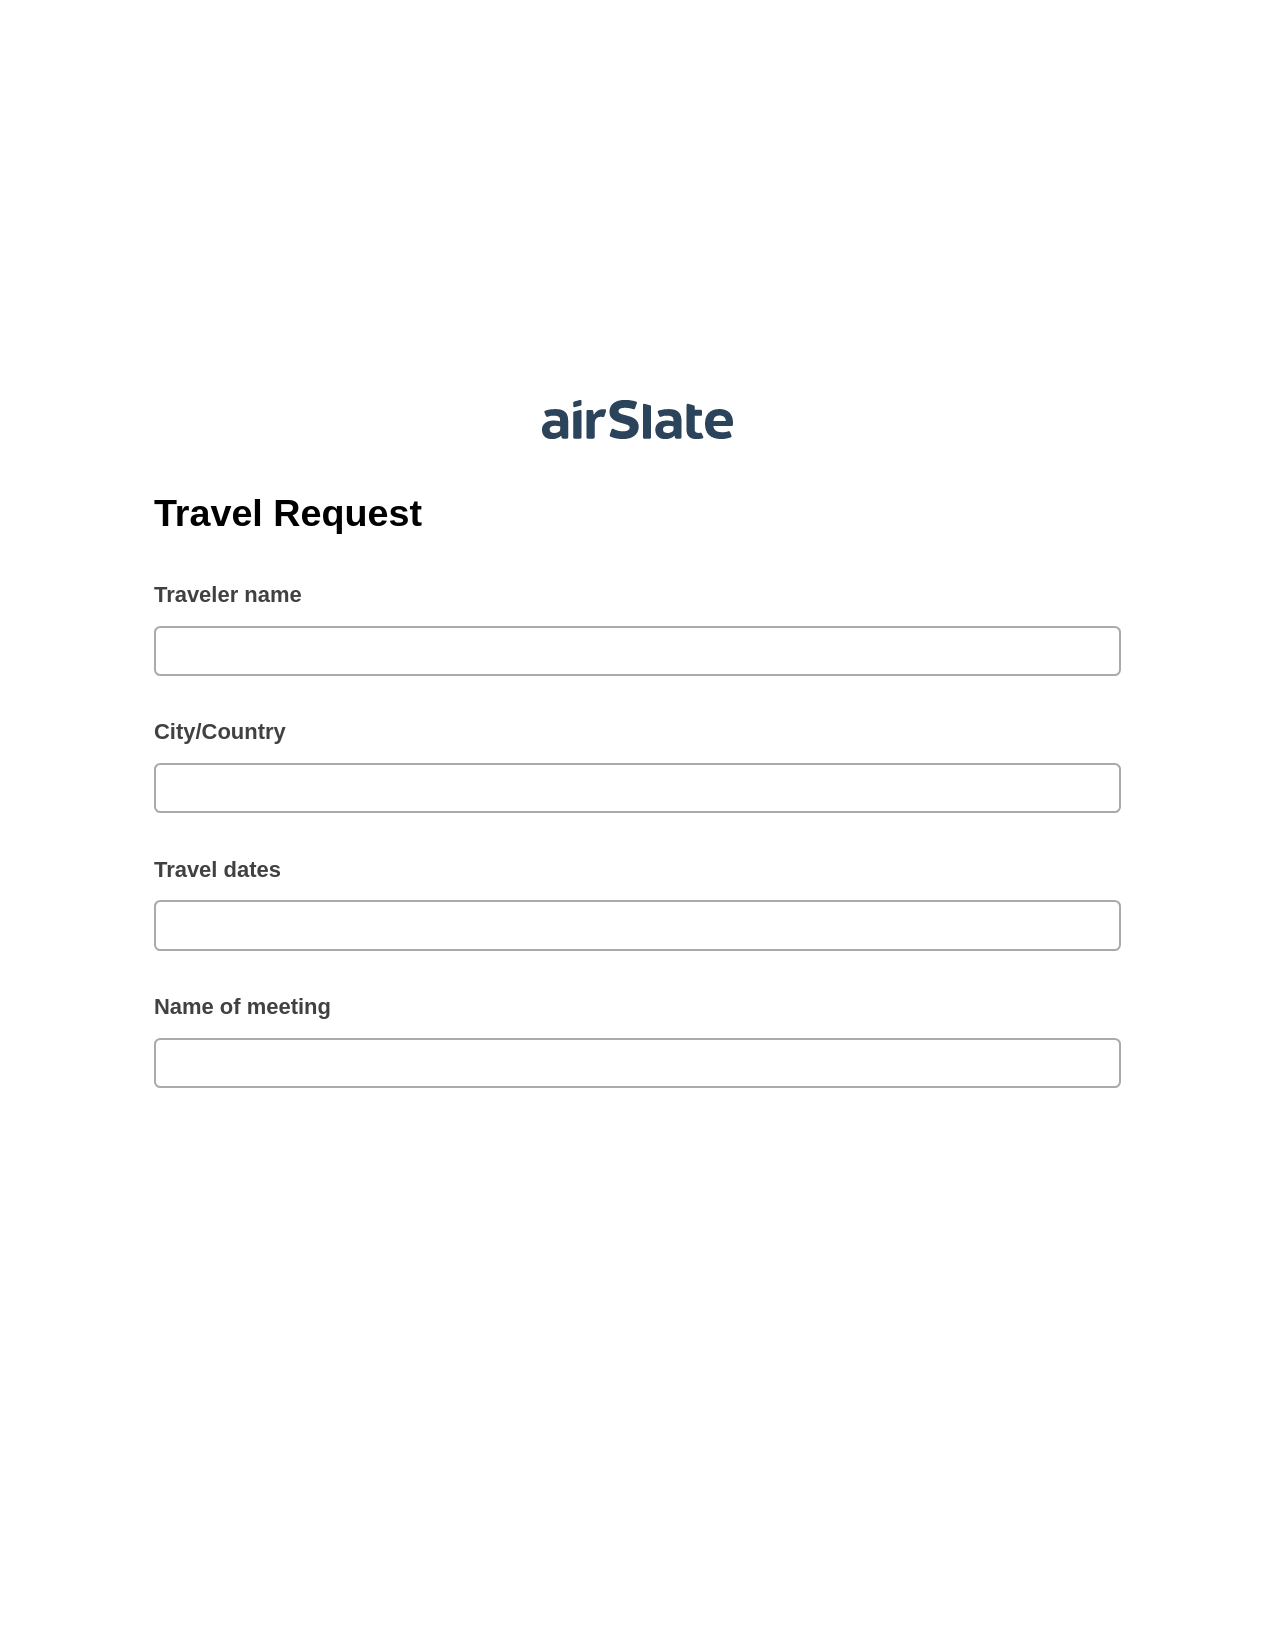 Travel Request Pre-fill from CSV File Bot, Pre-fill with Custom Data Bot, Export to Smartsheet